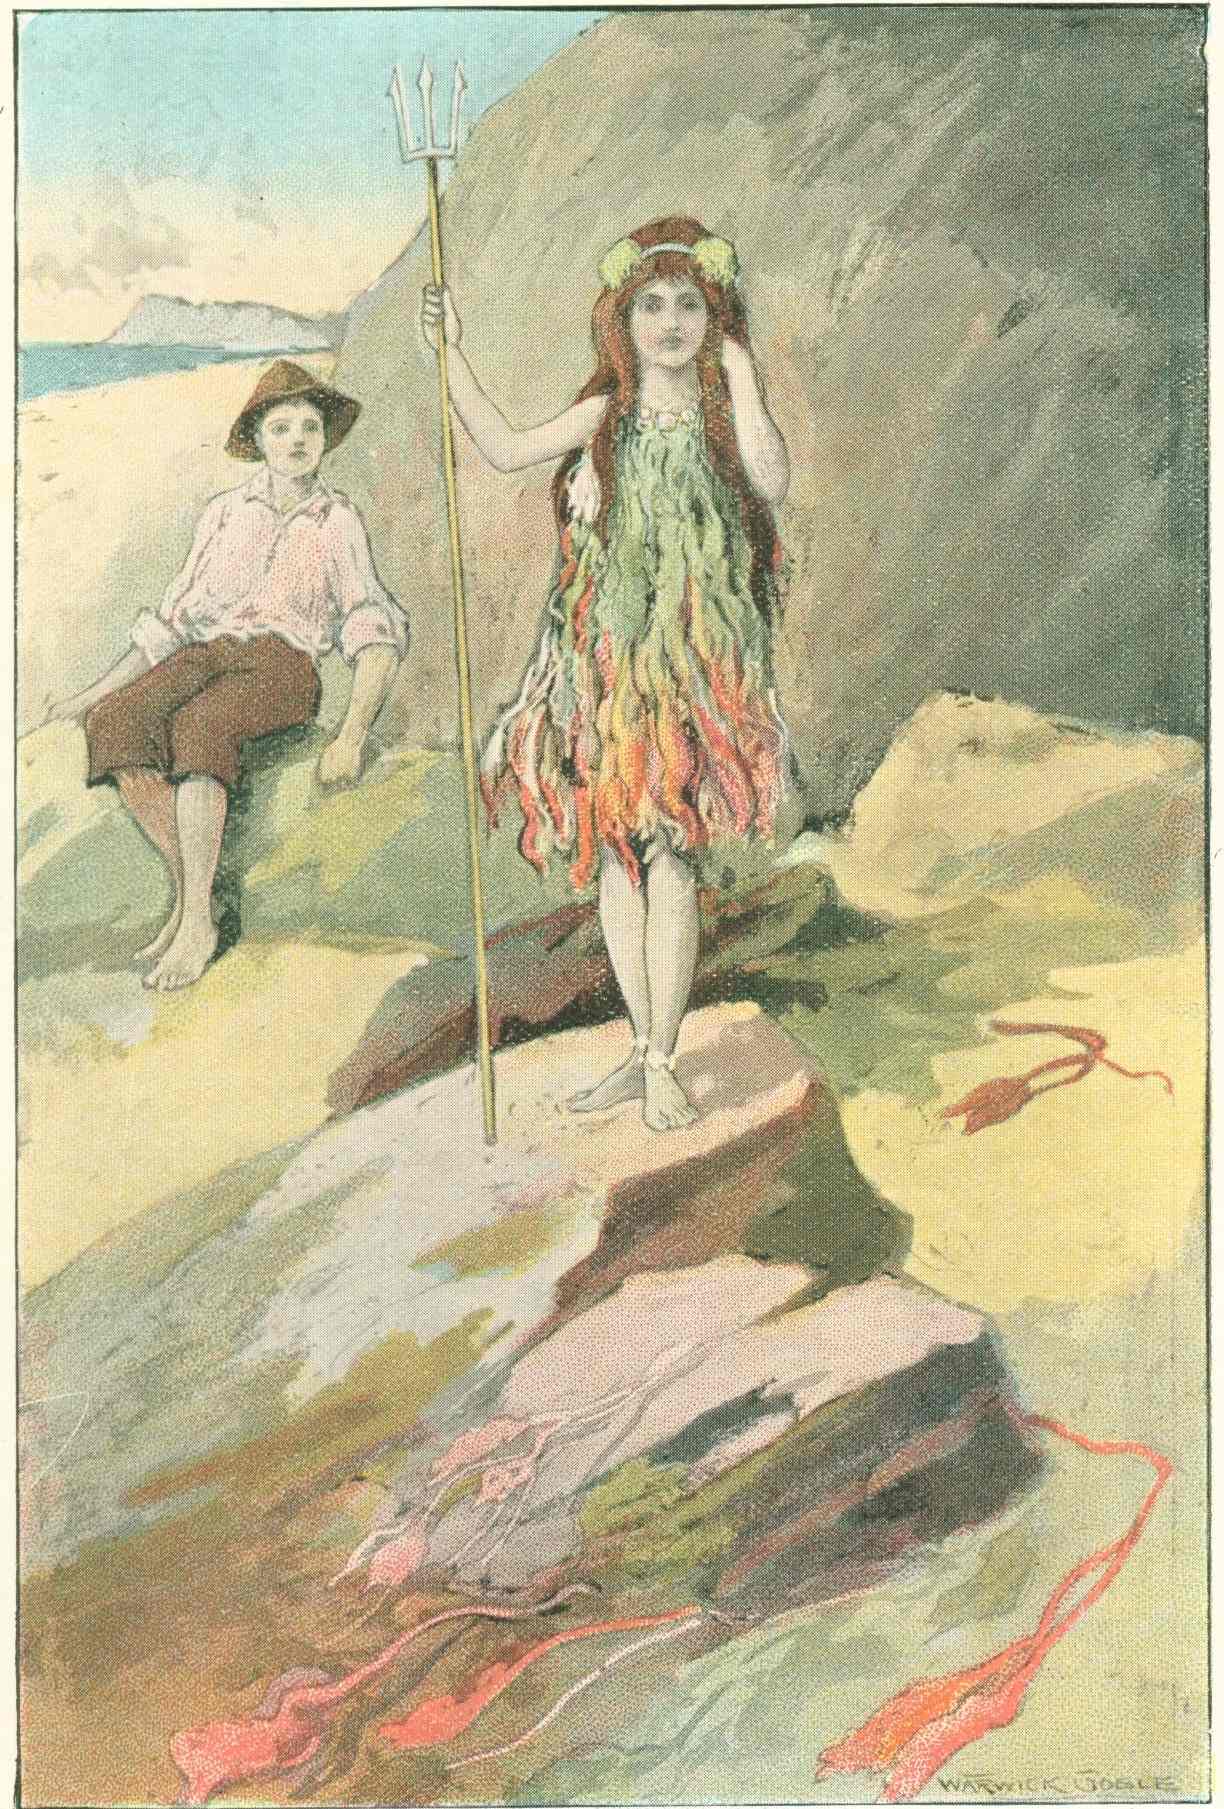 The Project Gutenberg eBook of Young Peggy McQueen, by Gordon Stables.